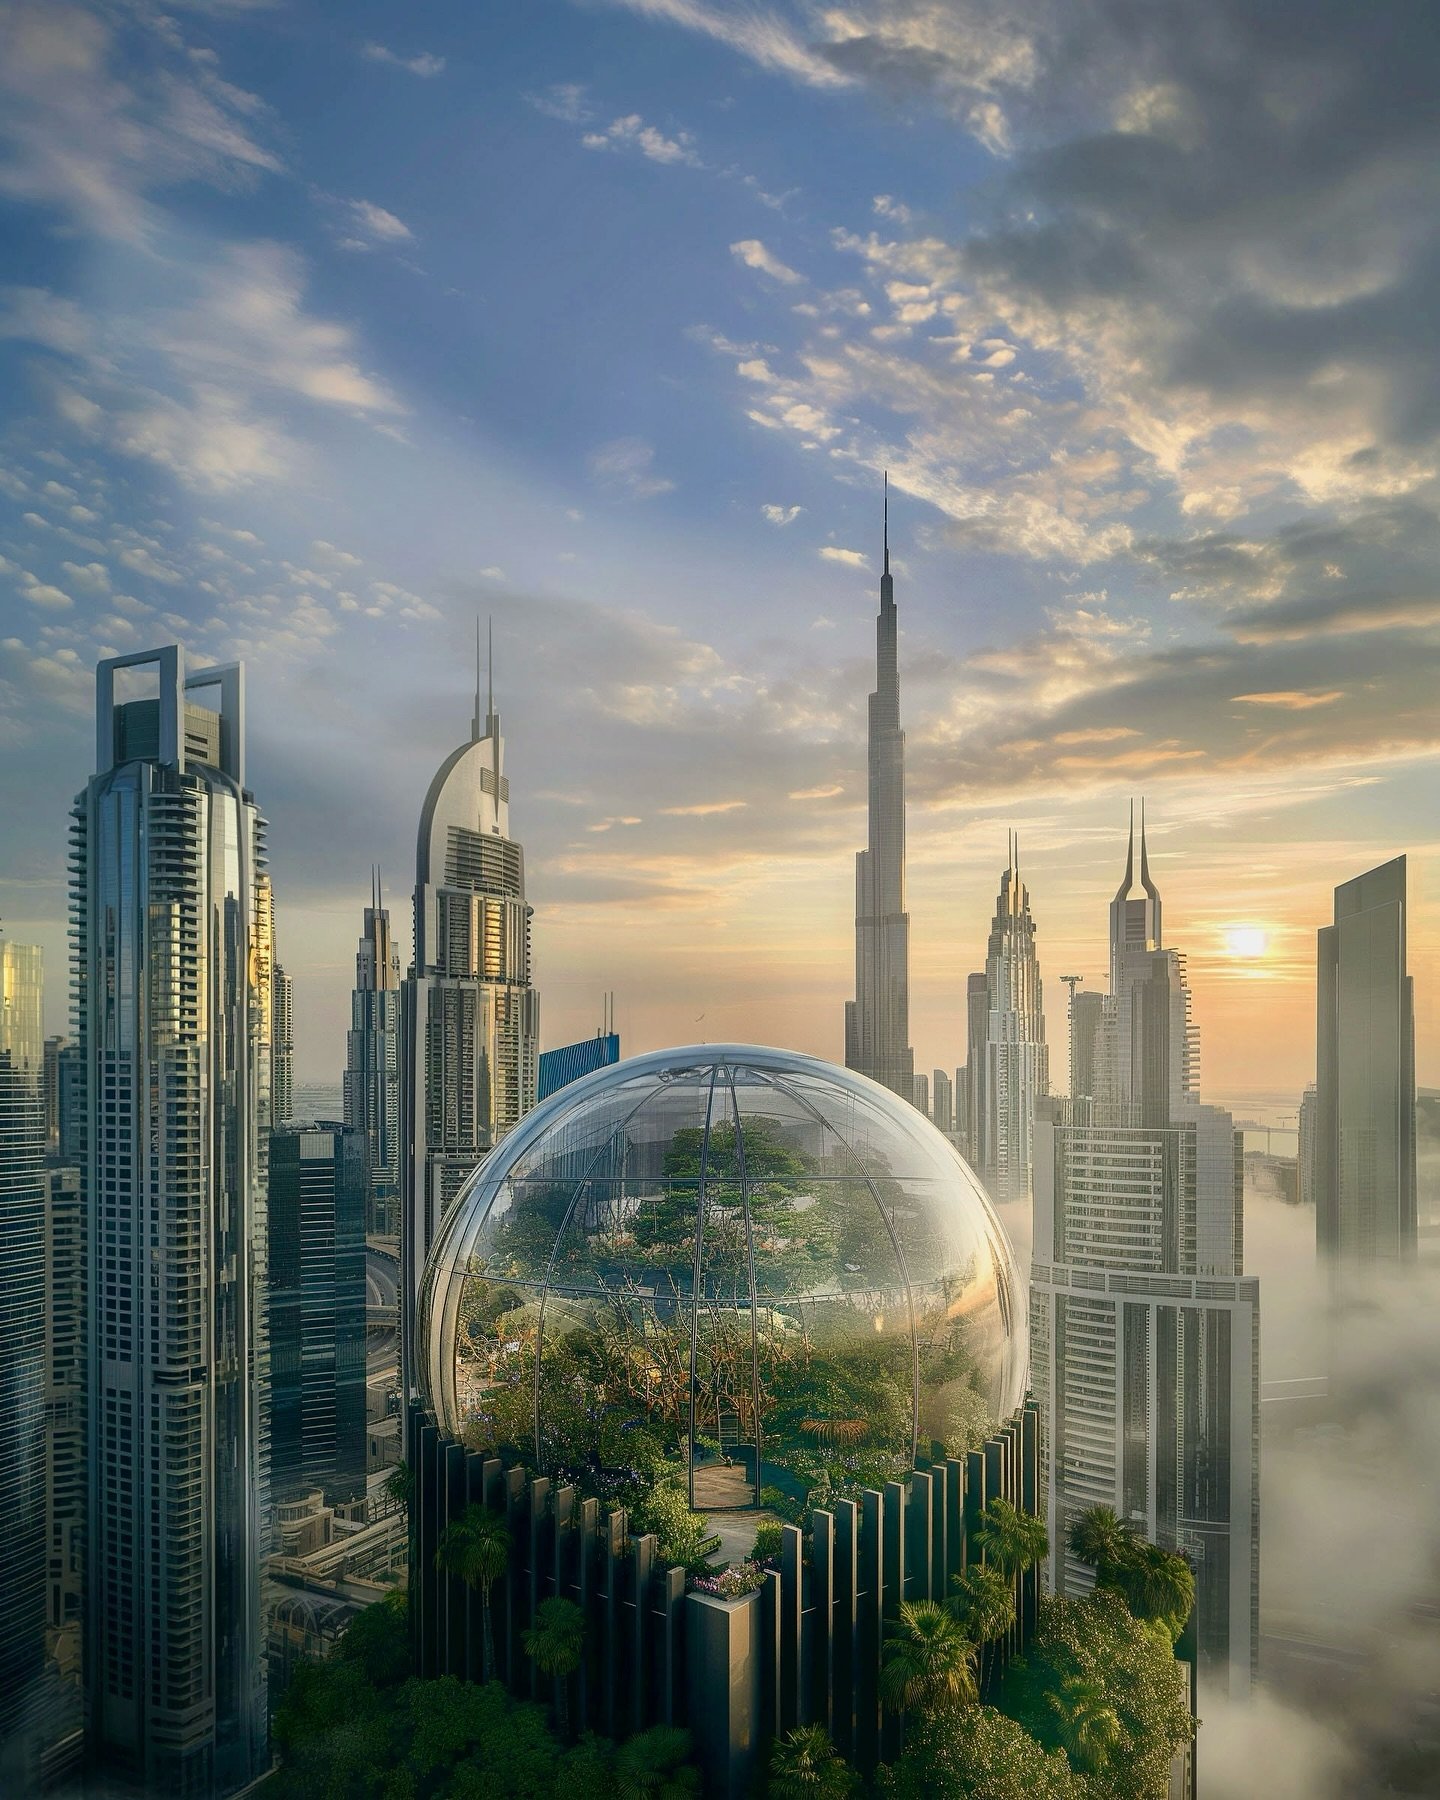 Botanical Skyscraper 🌱 🏙️

A garden in the clouds, a &lsquo;man-made oasis&rsquo;, but really what is it you miss? Nature? Spectacle? Both 🤭?

#DubaiGardens @dubaifuture @d3dubai